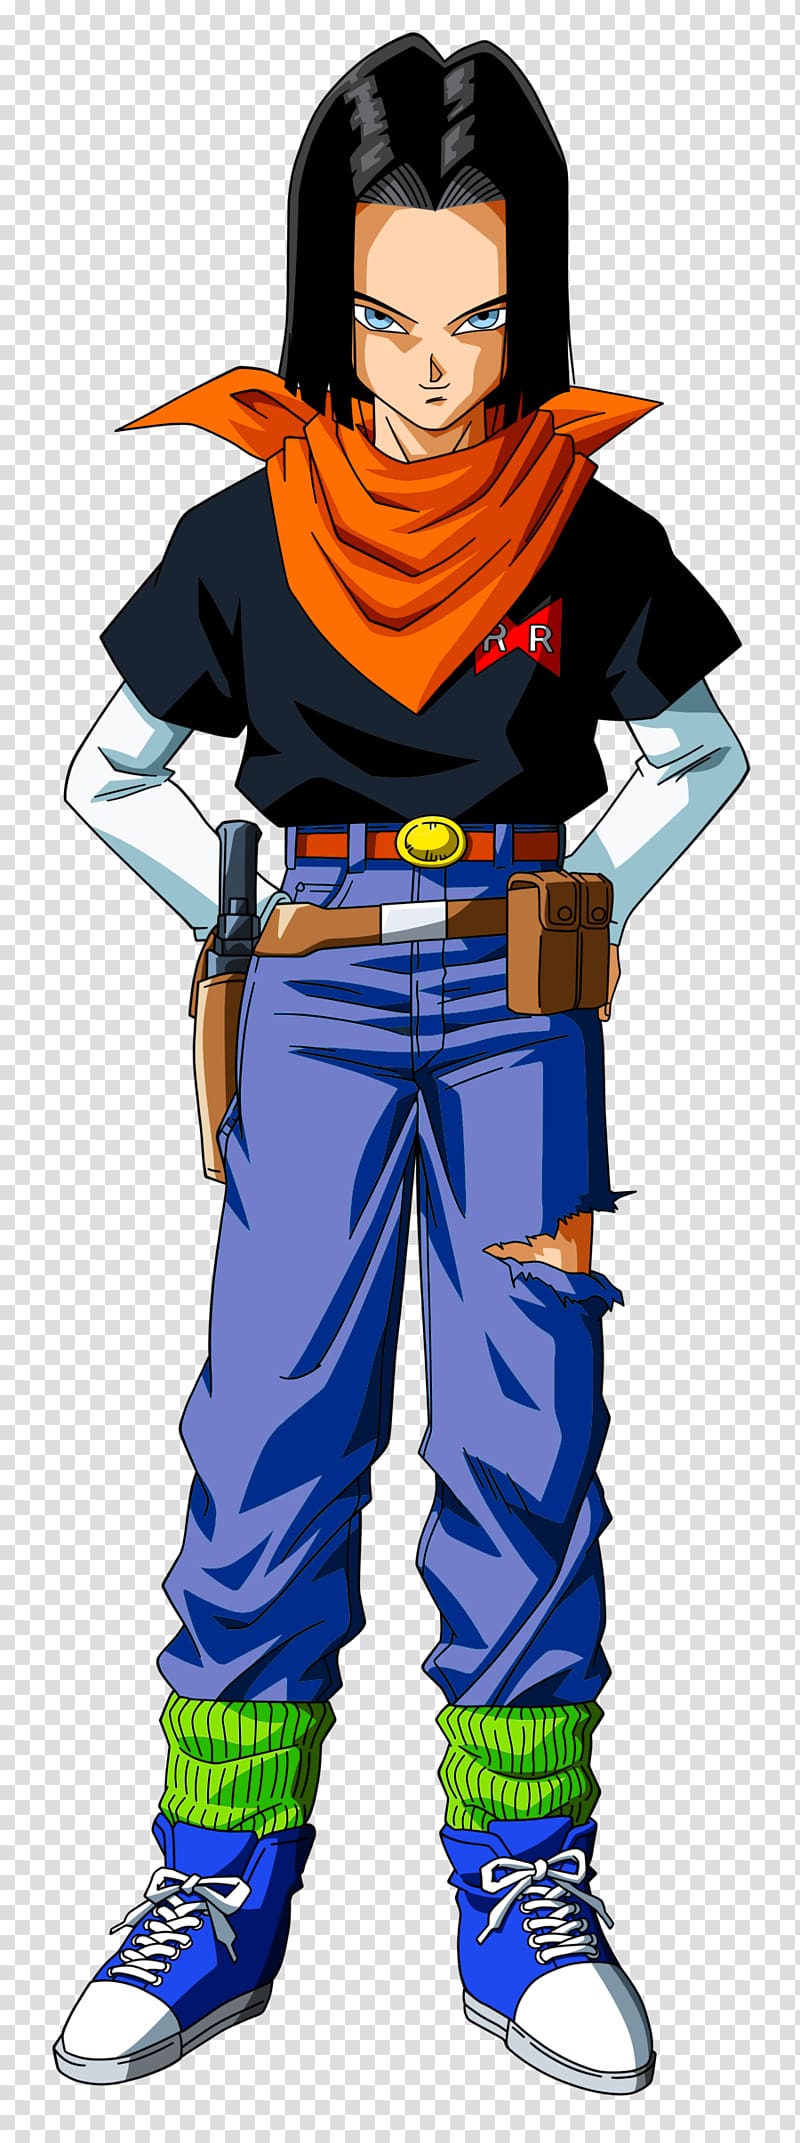 Android 17 Android 18 Cell Doctor Gero Goku, 3D villain transparent background PNG clipart